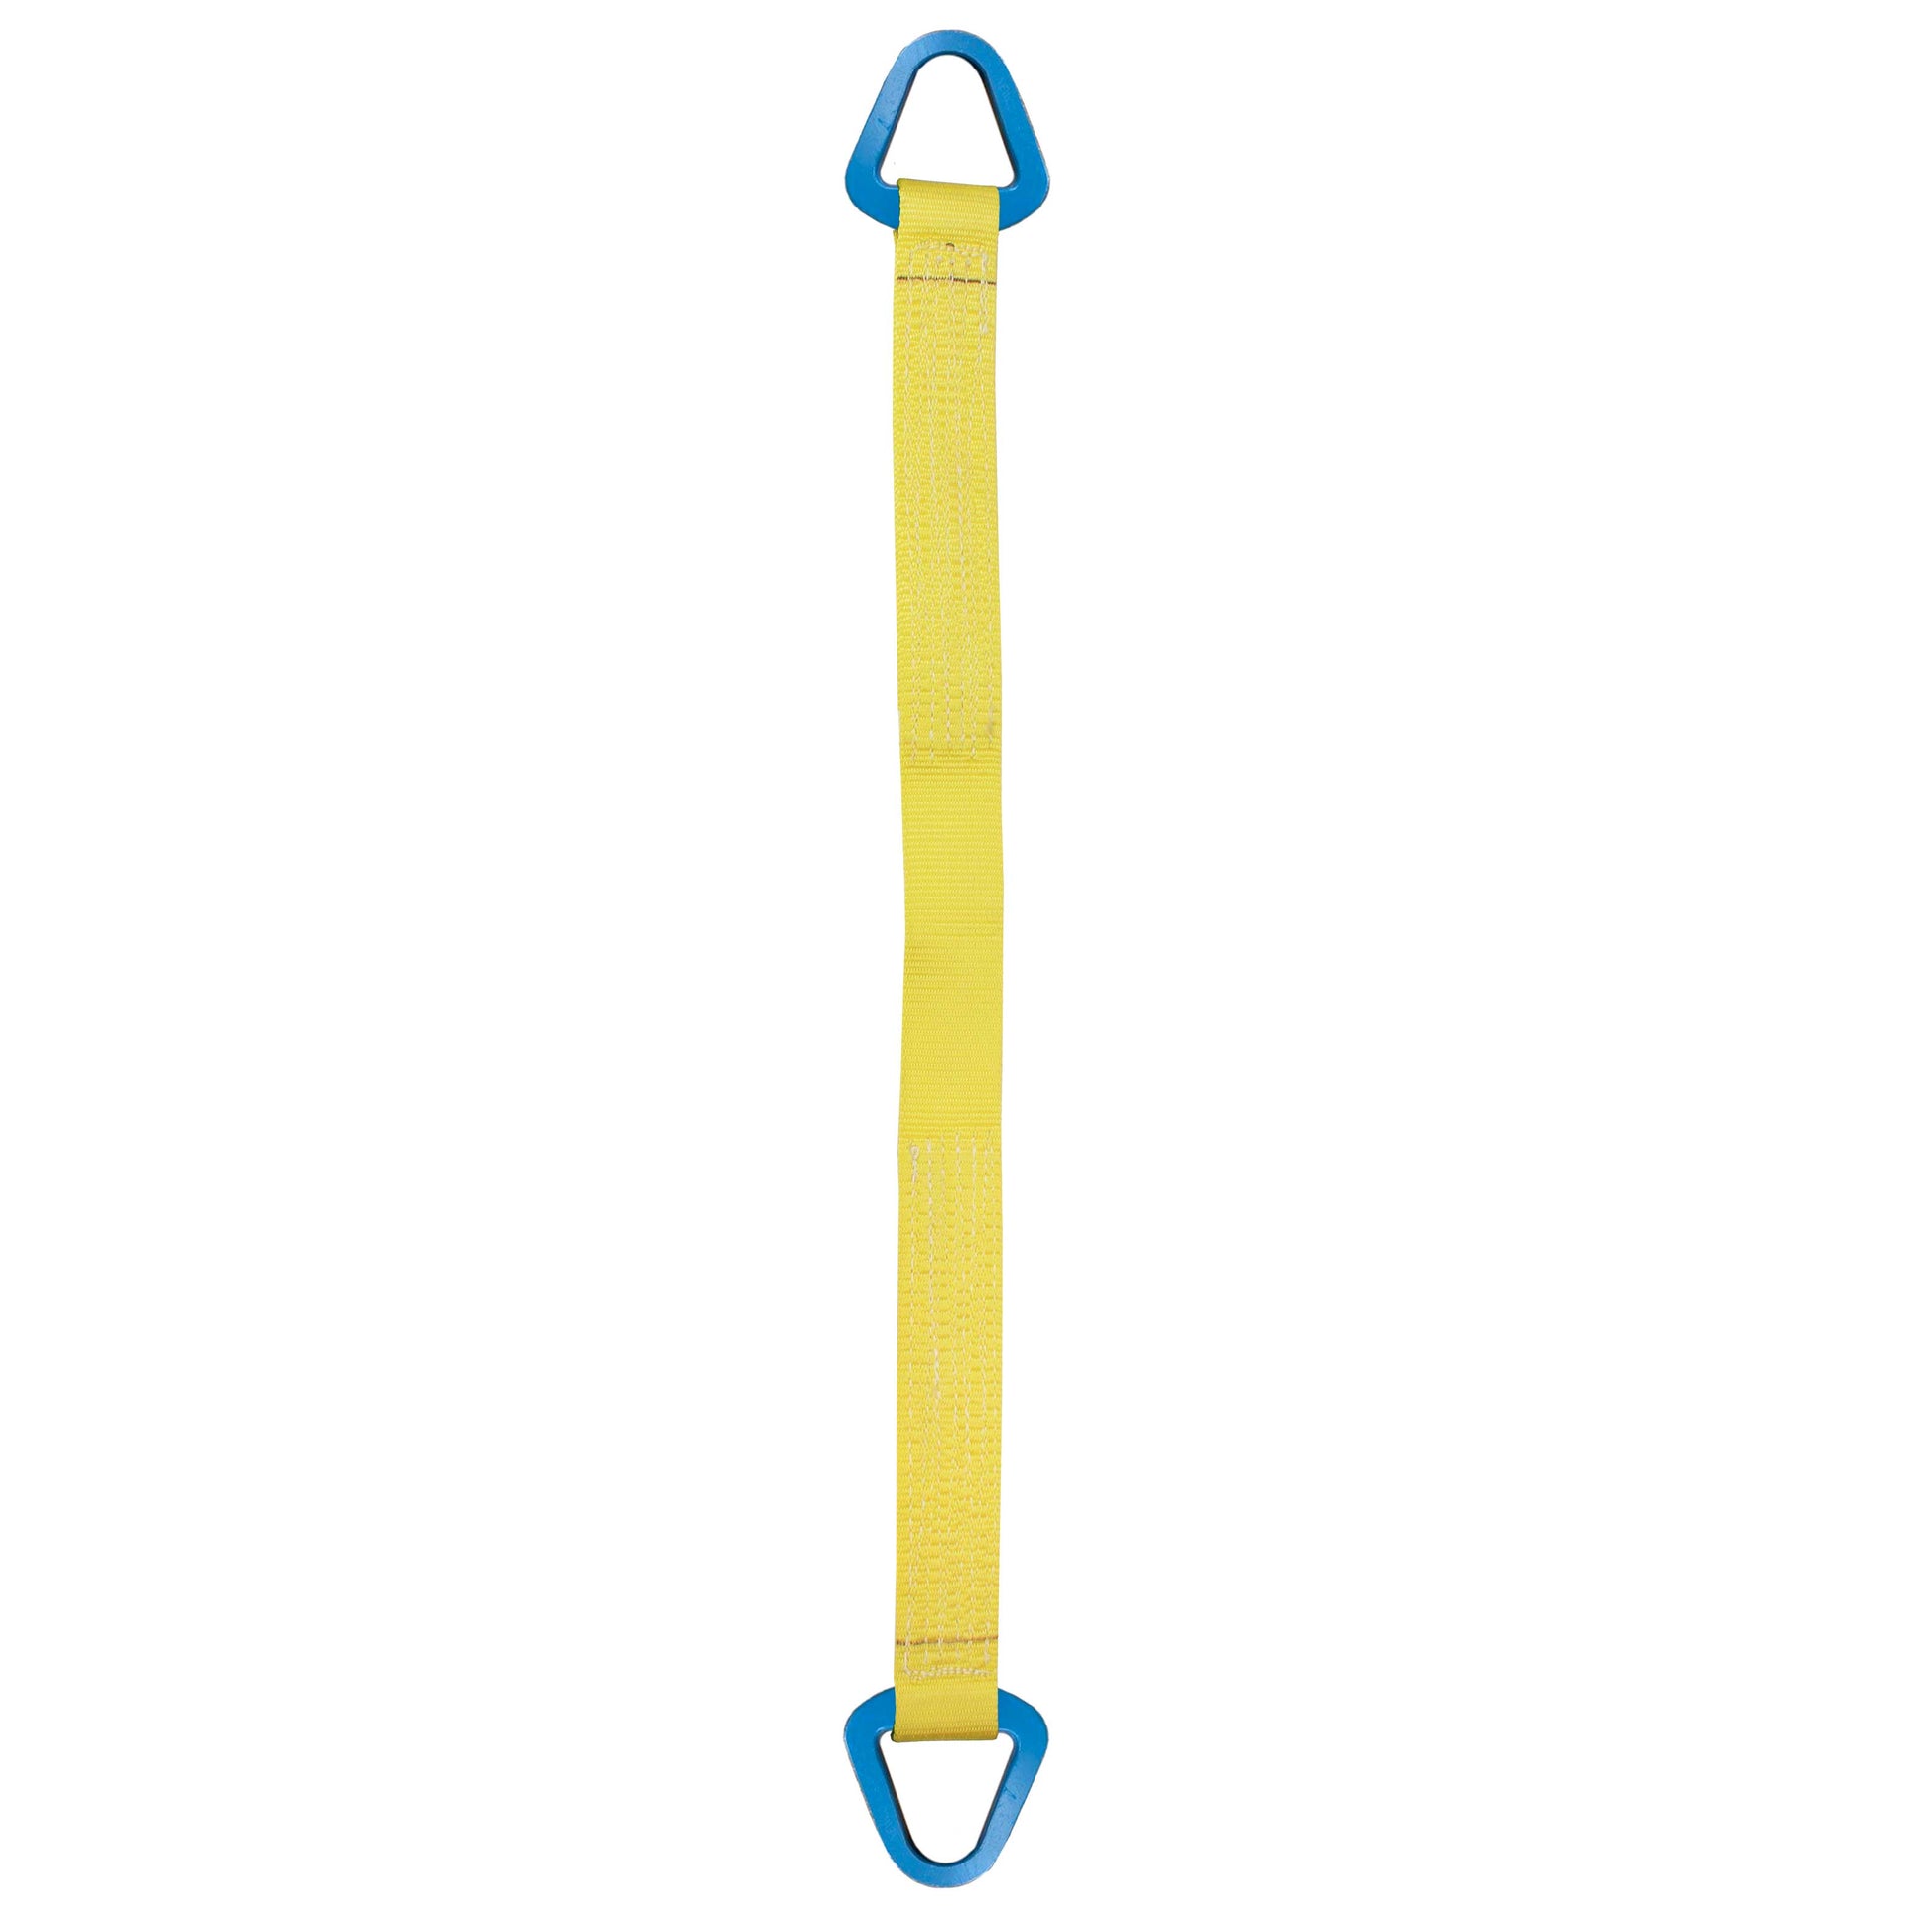 Nylon Lifting Sling Triangle 6 inch x 12 foot 2ply image 1 of 2